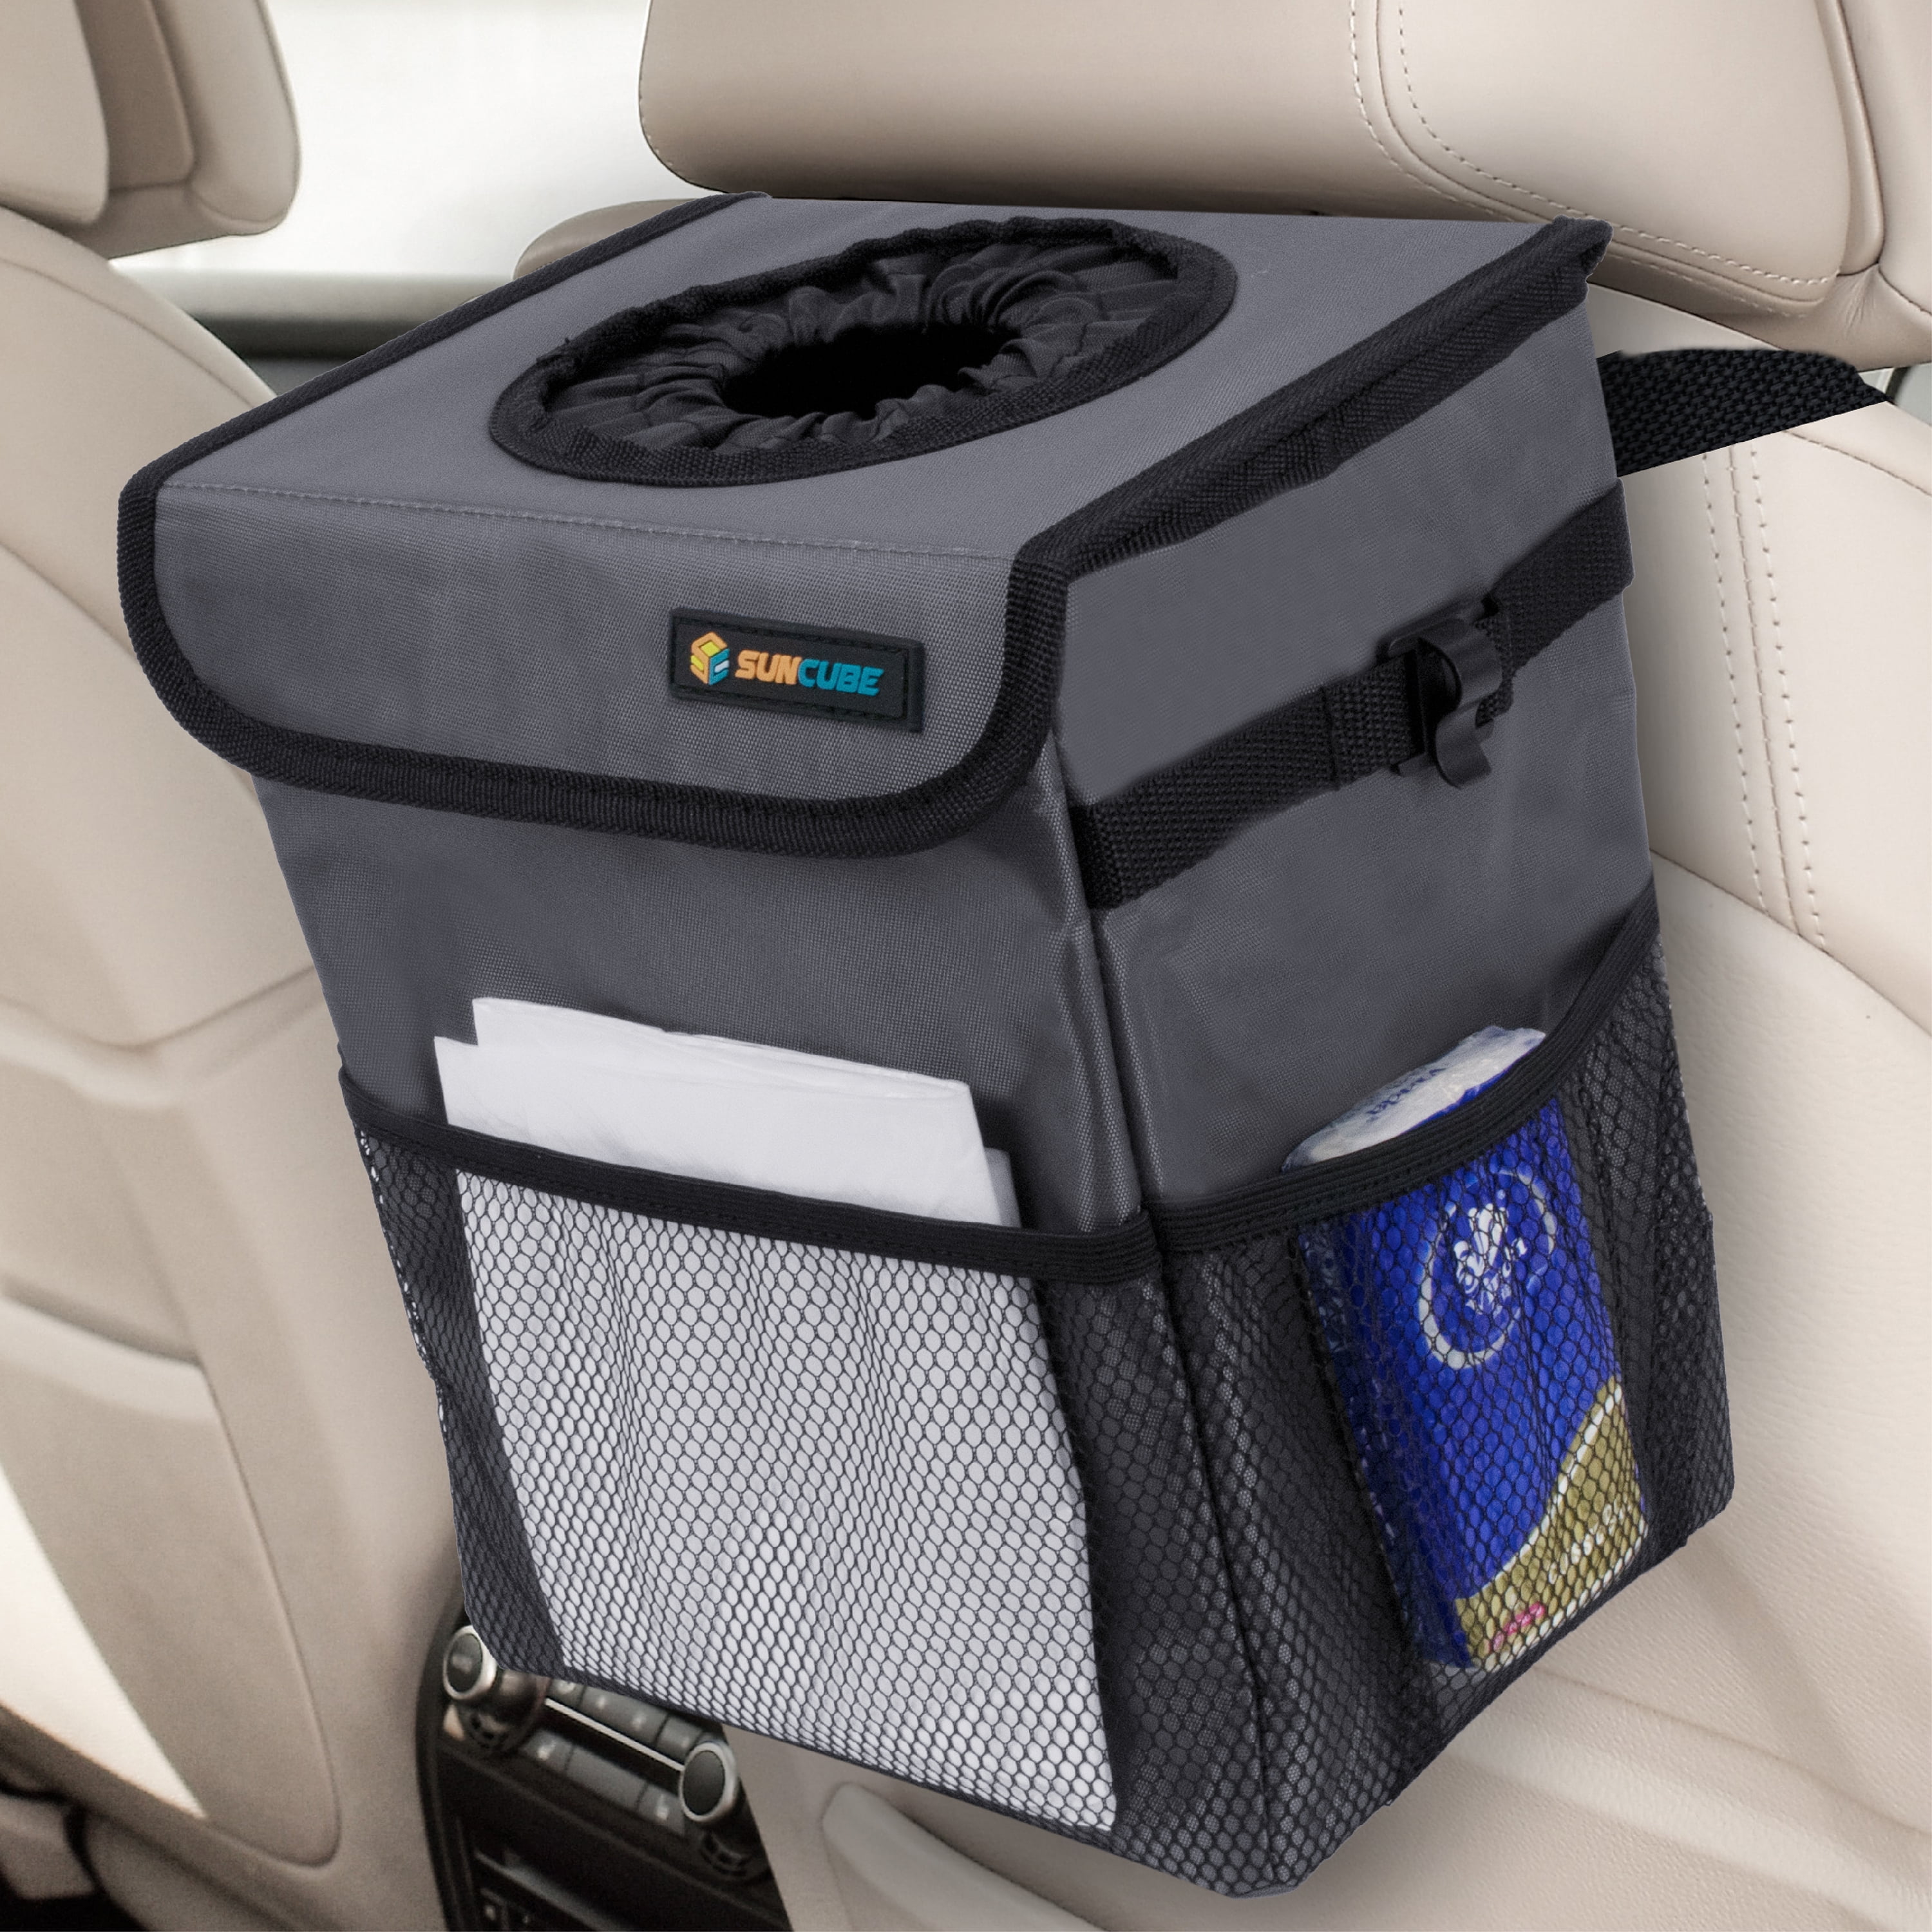 EPAuto Waterproof Car Trash Can with Lid and Storage Pockets, Black 